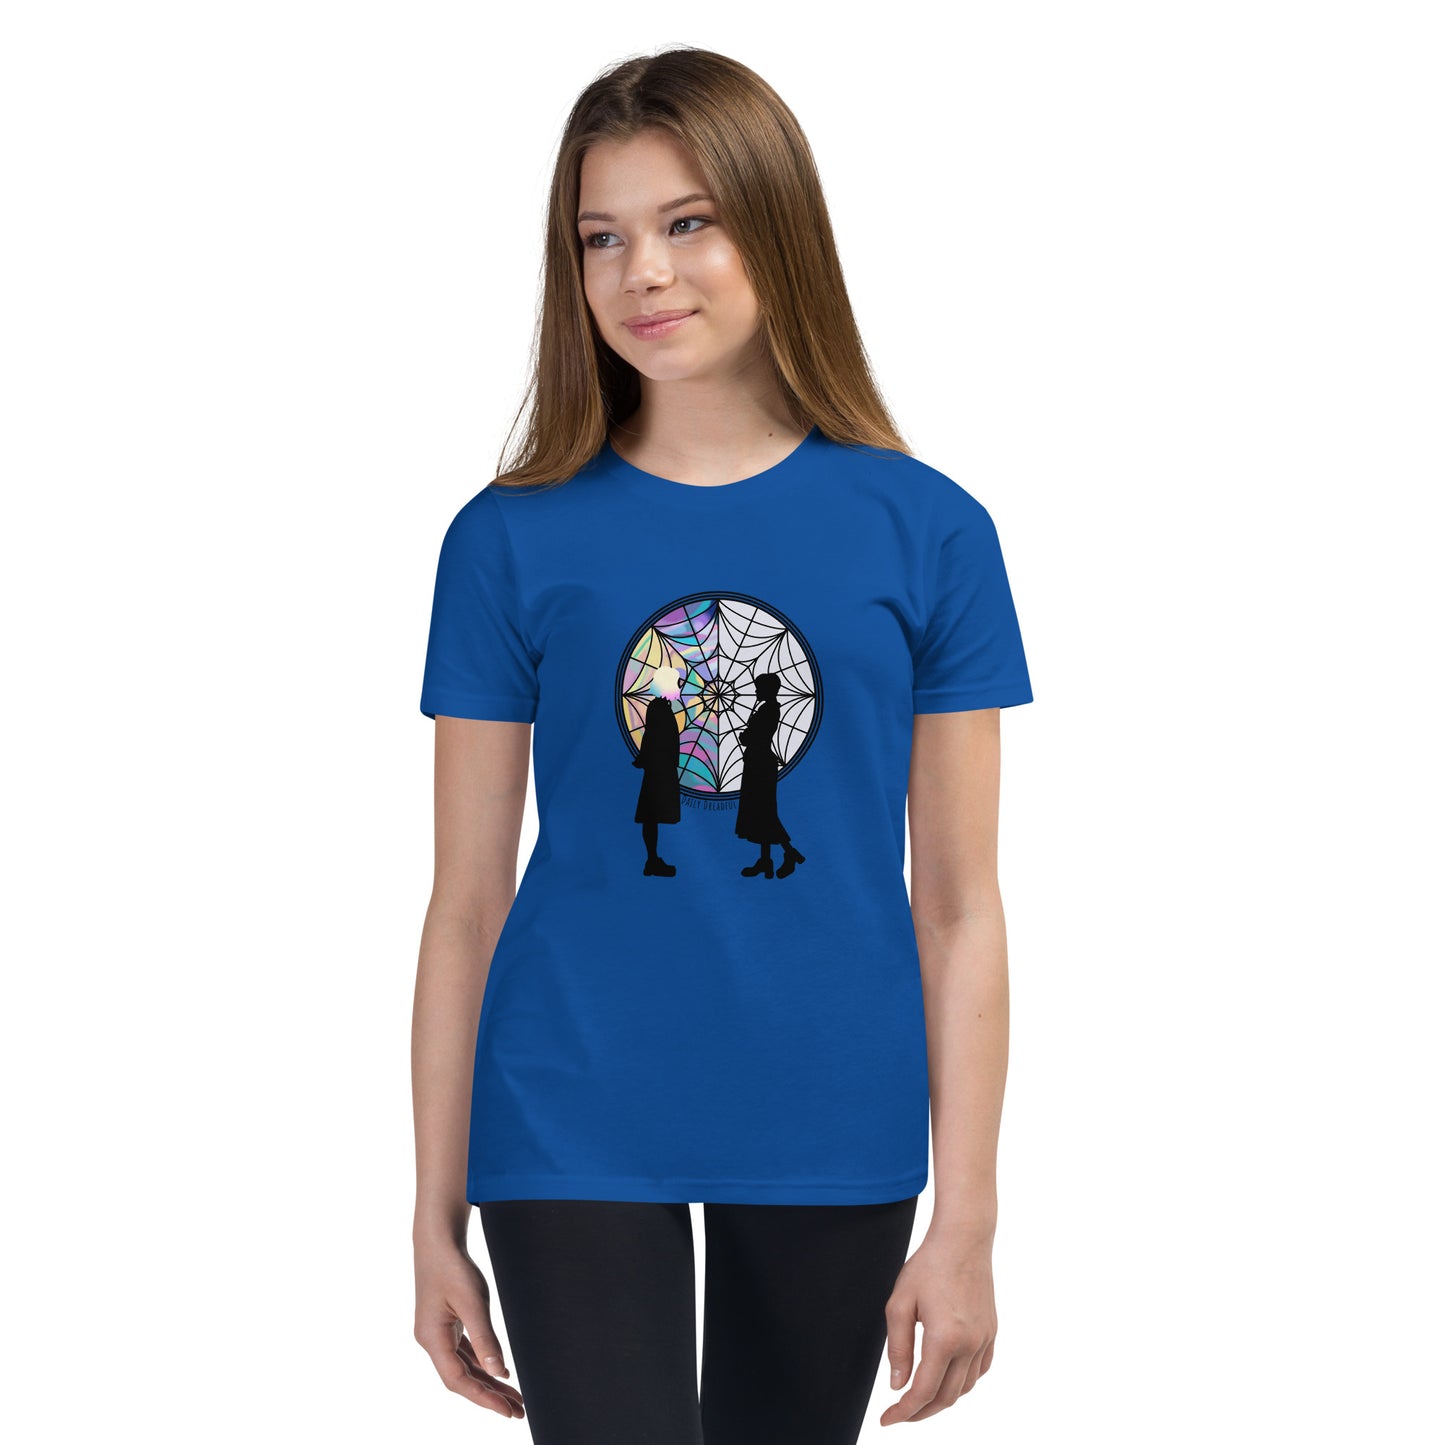 true royal "Wednesday Addams and Enid" Youth Short Sleeve T-Shirt from Daily Dreadful